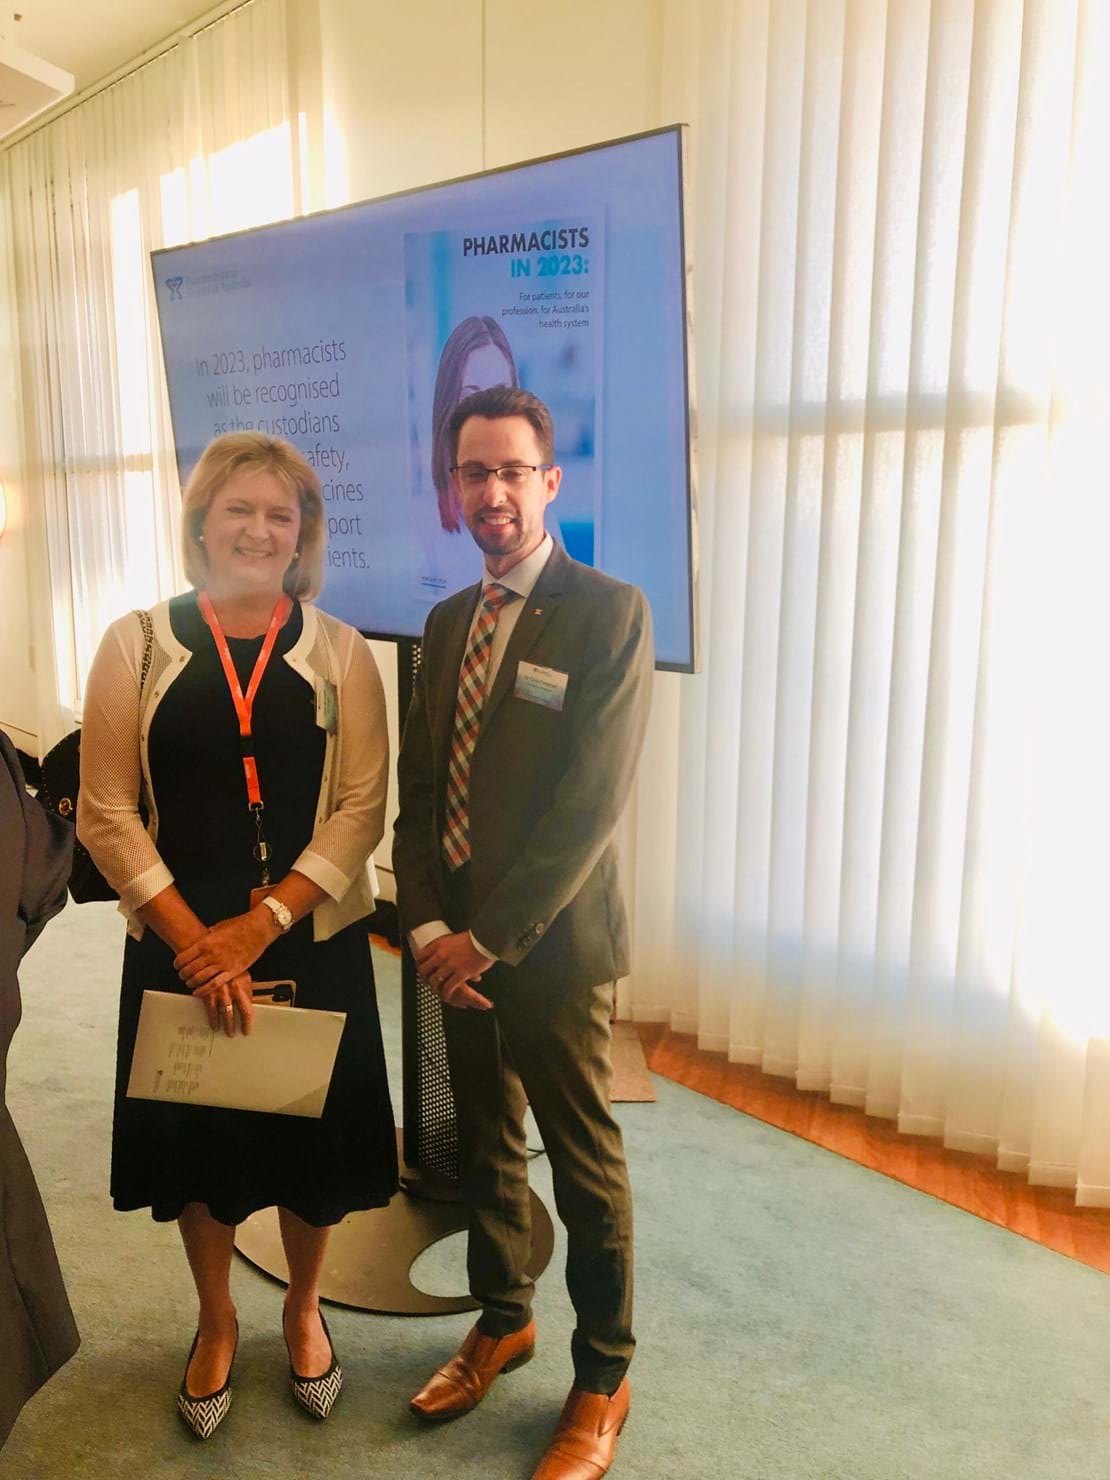 Painaustralia CEO, Carol Bennett and Chris Freeman and Pharmacists in the Future launch